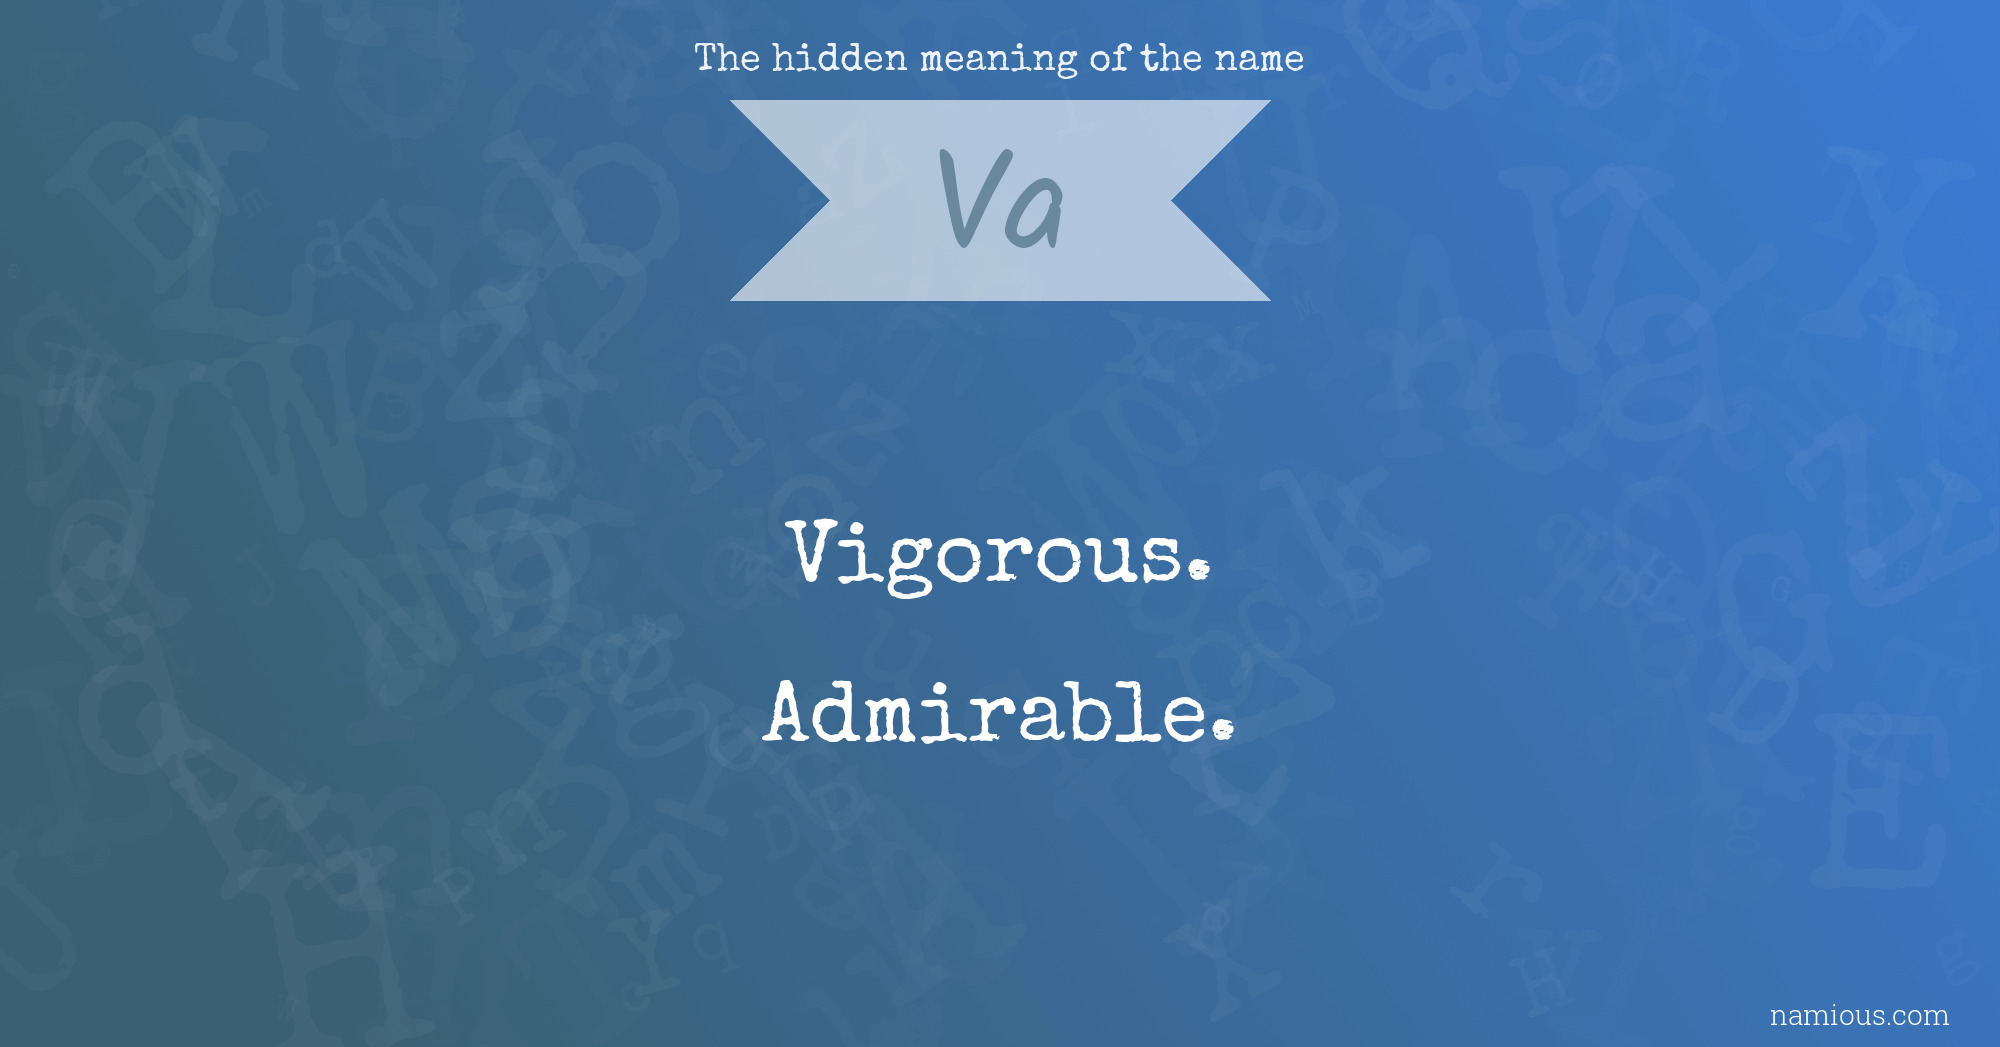 The hidden meaning of the name Va